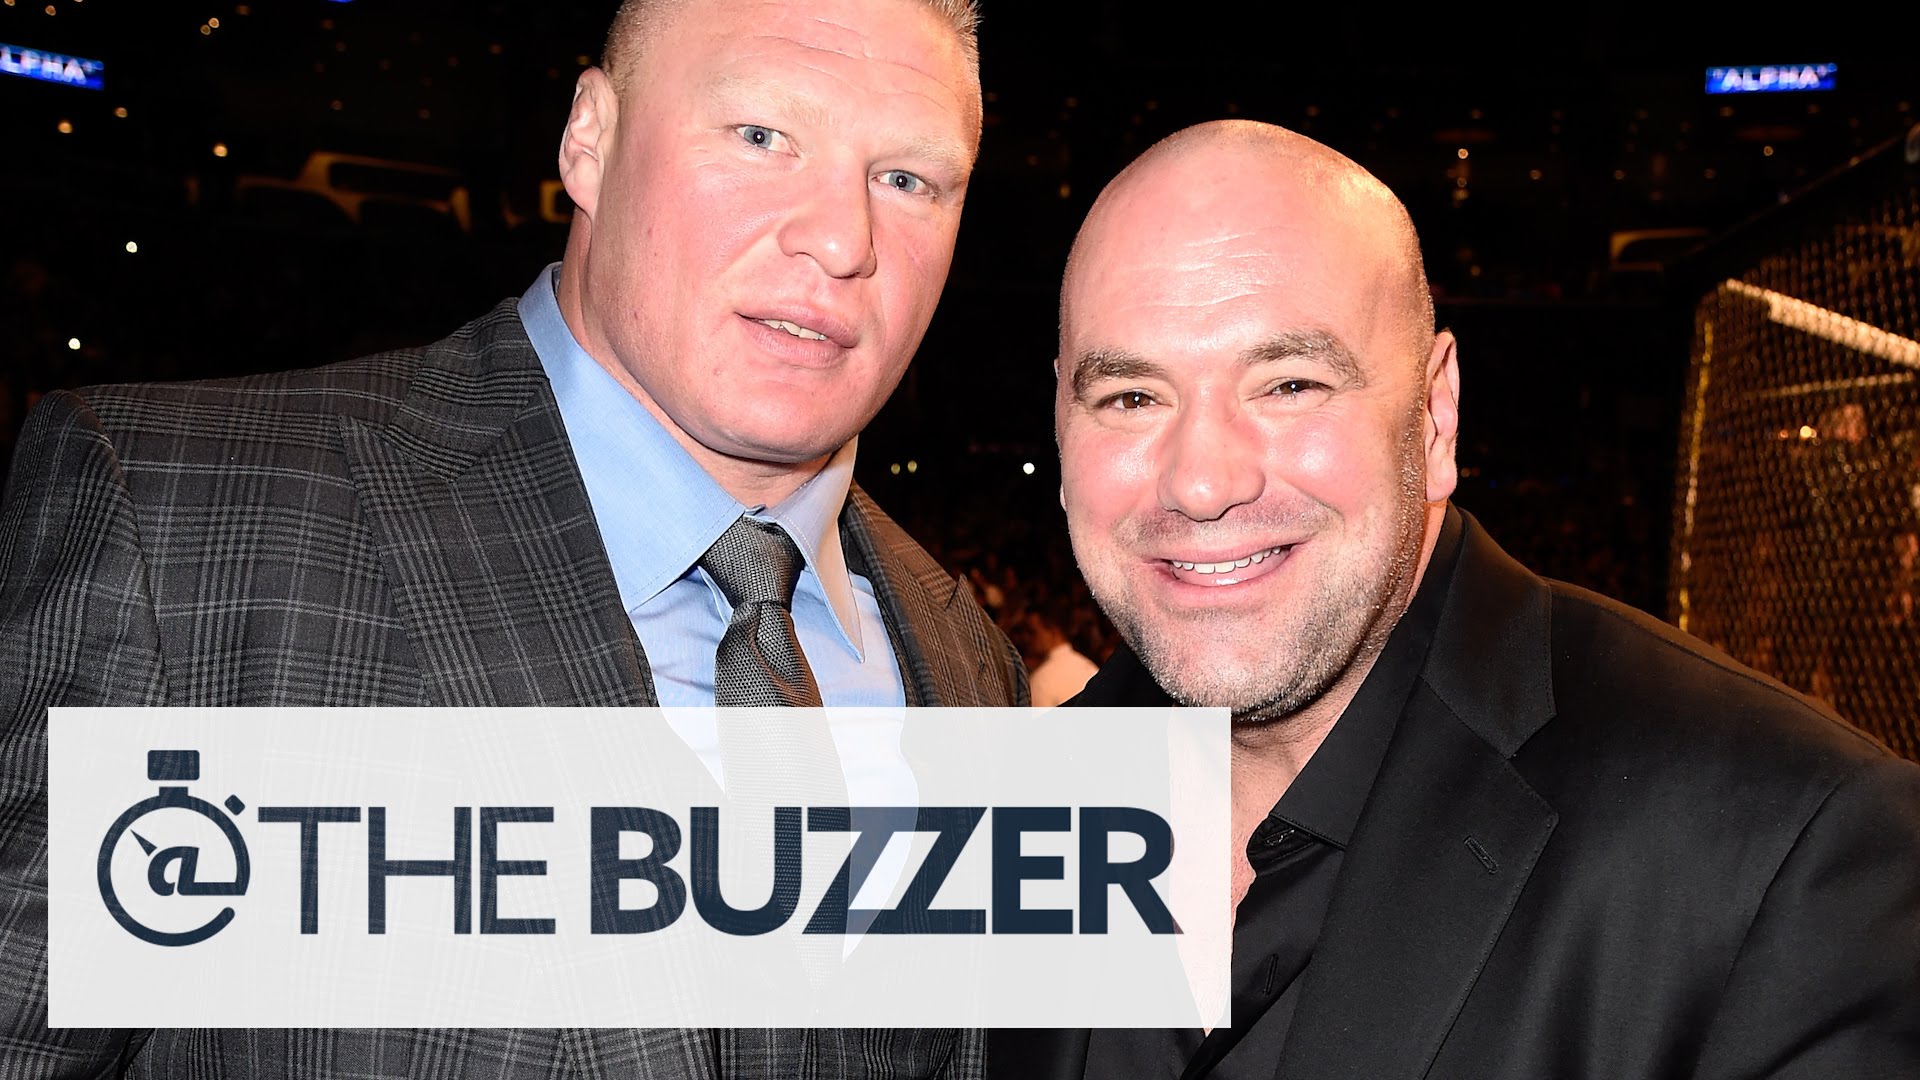 Dana White's reaction to Brock Lesnar's decision to re-sign with WWE